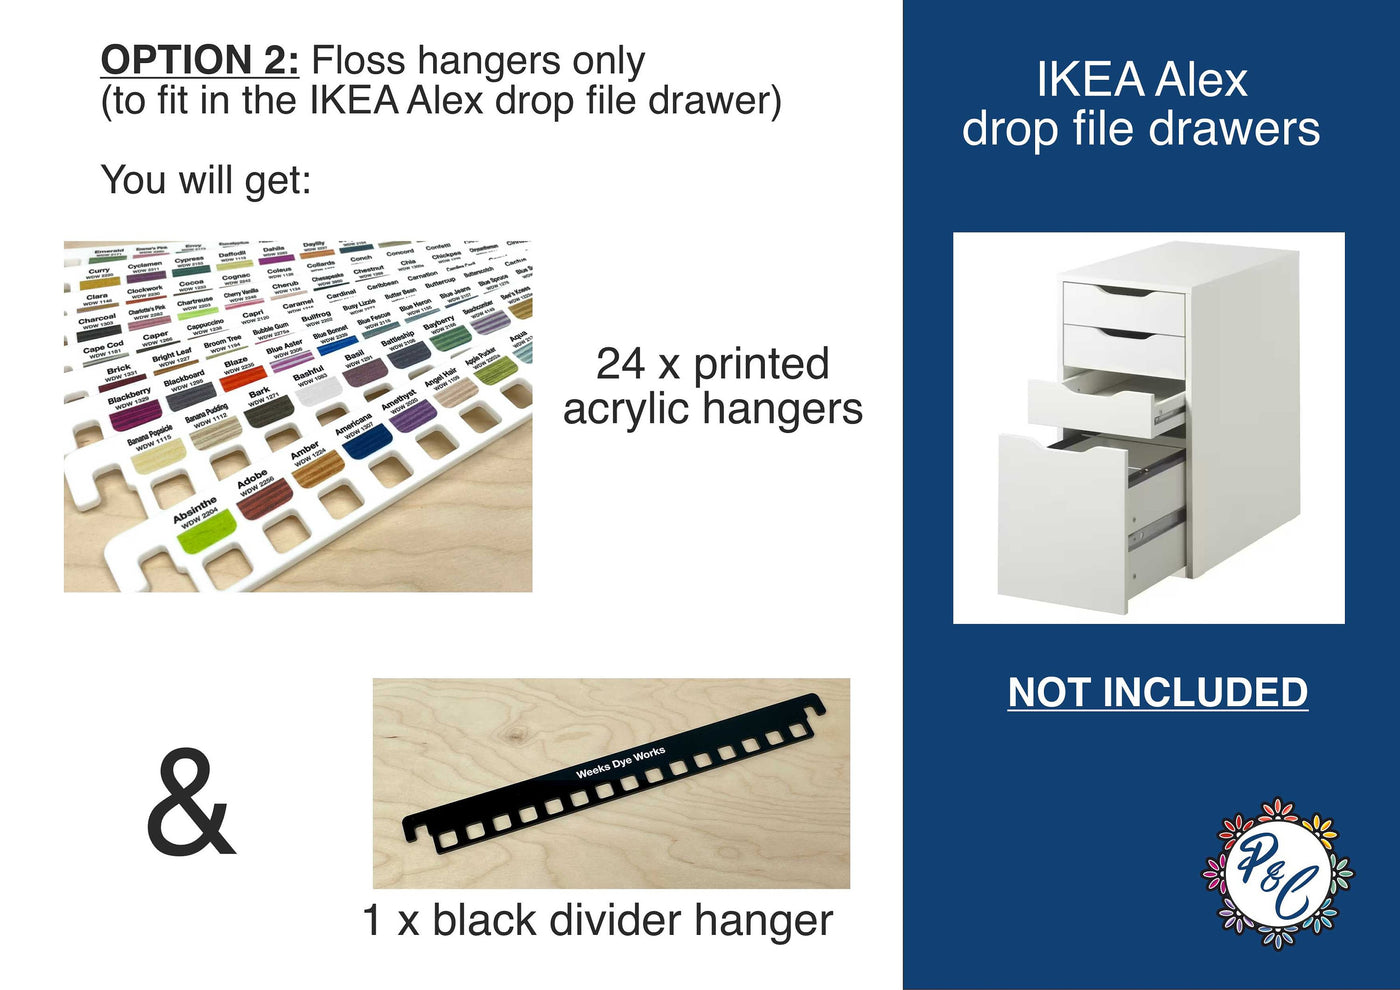 Weeks Dye Works Floss hangers with x353 printed swatches - x24 acrylic hangers | NO floss or storage included